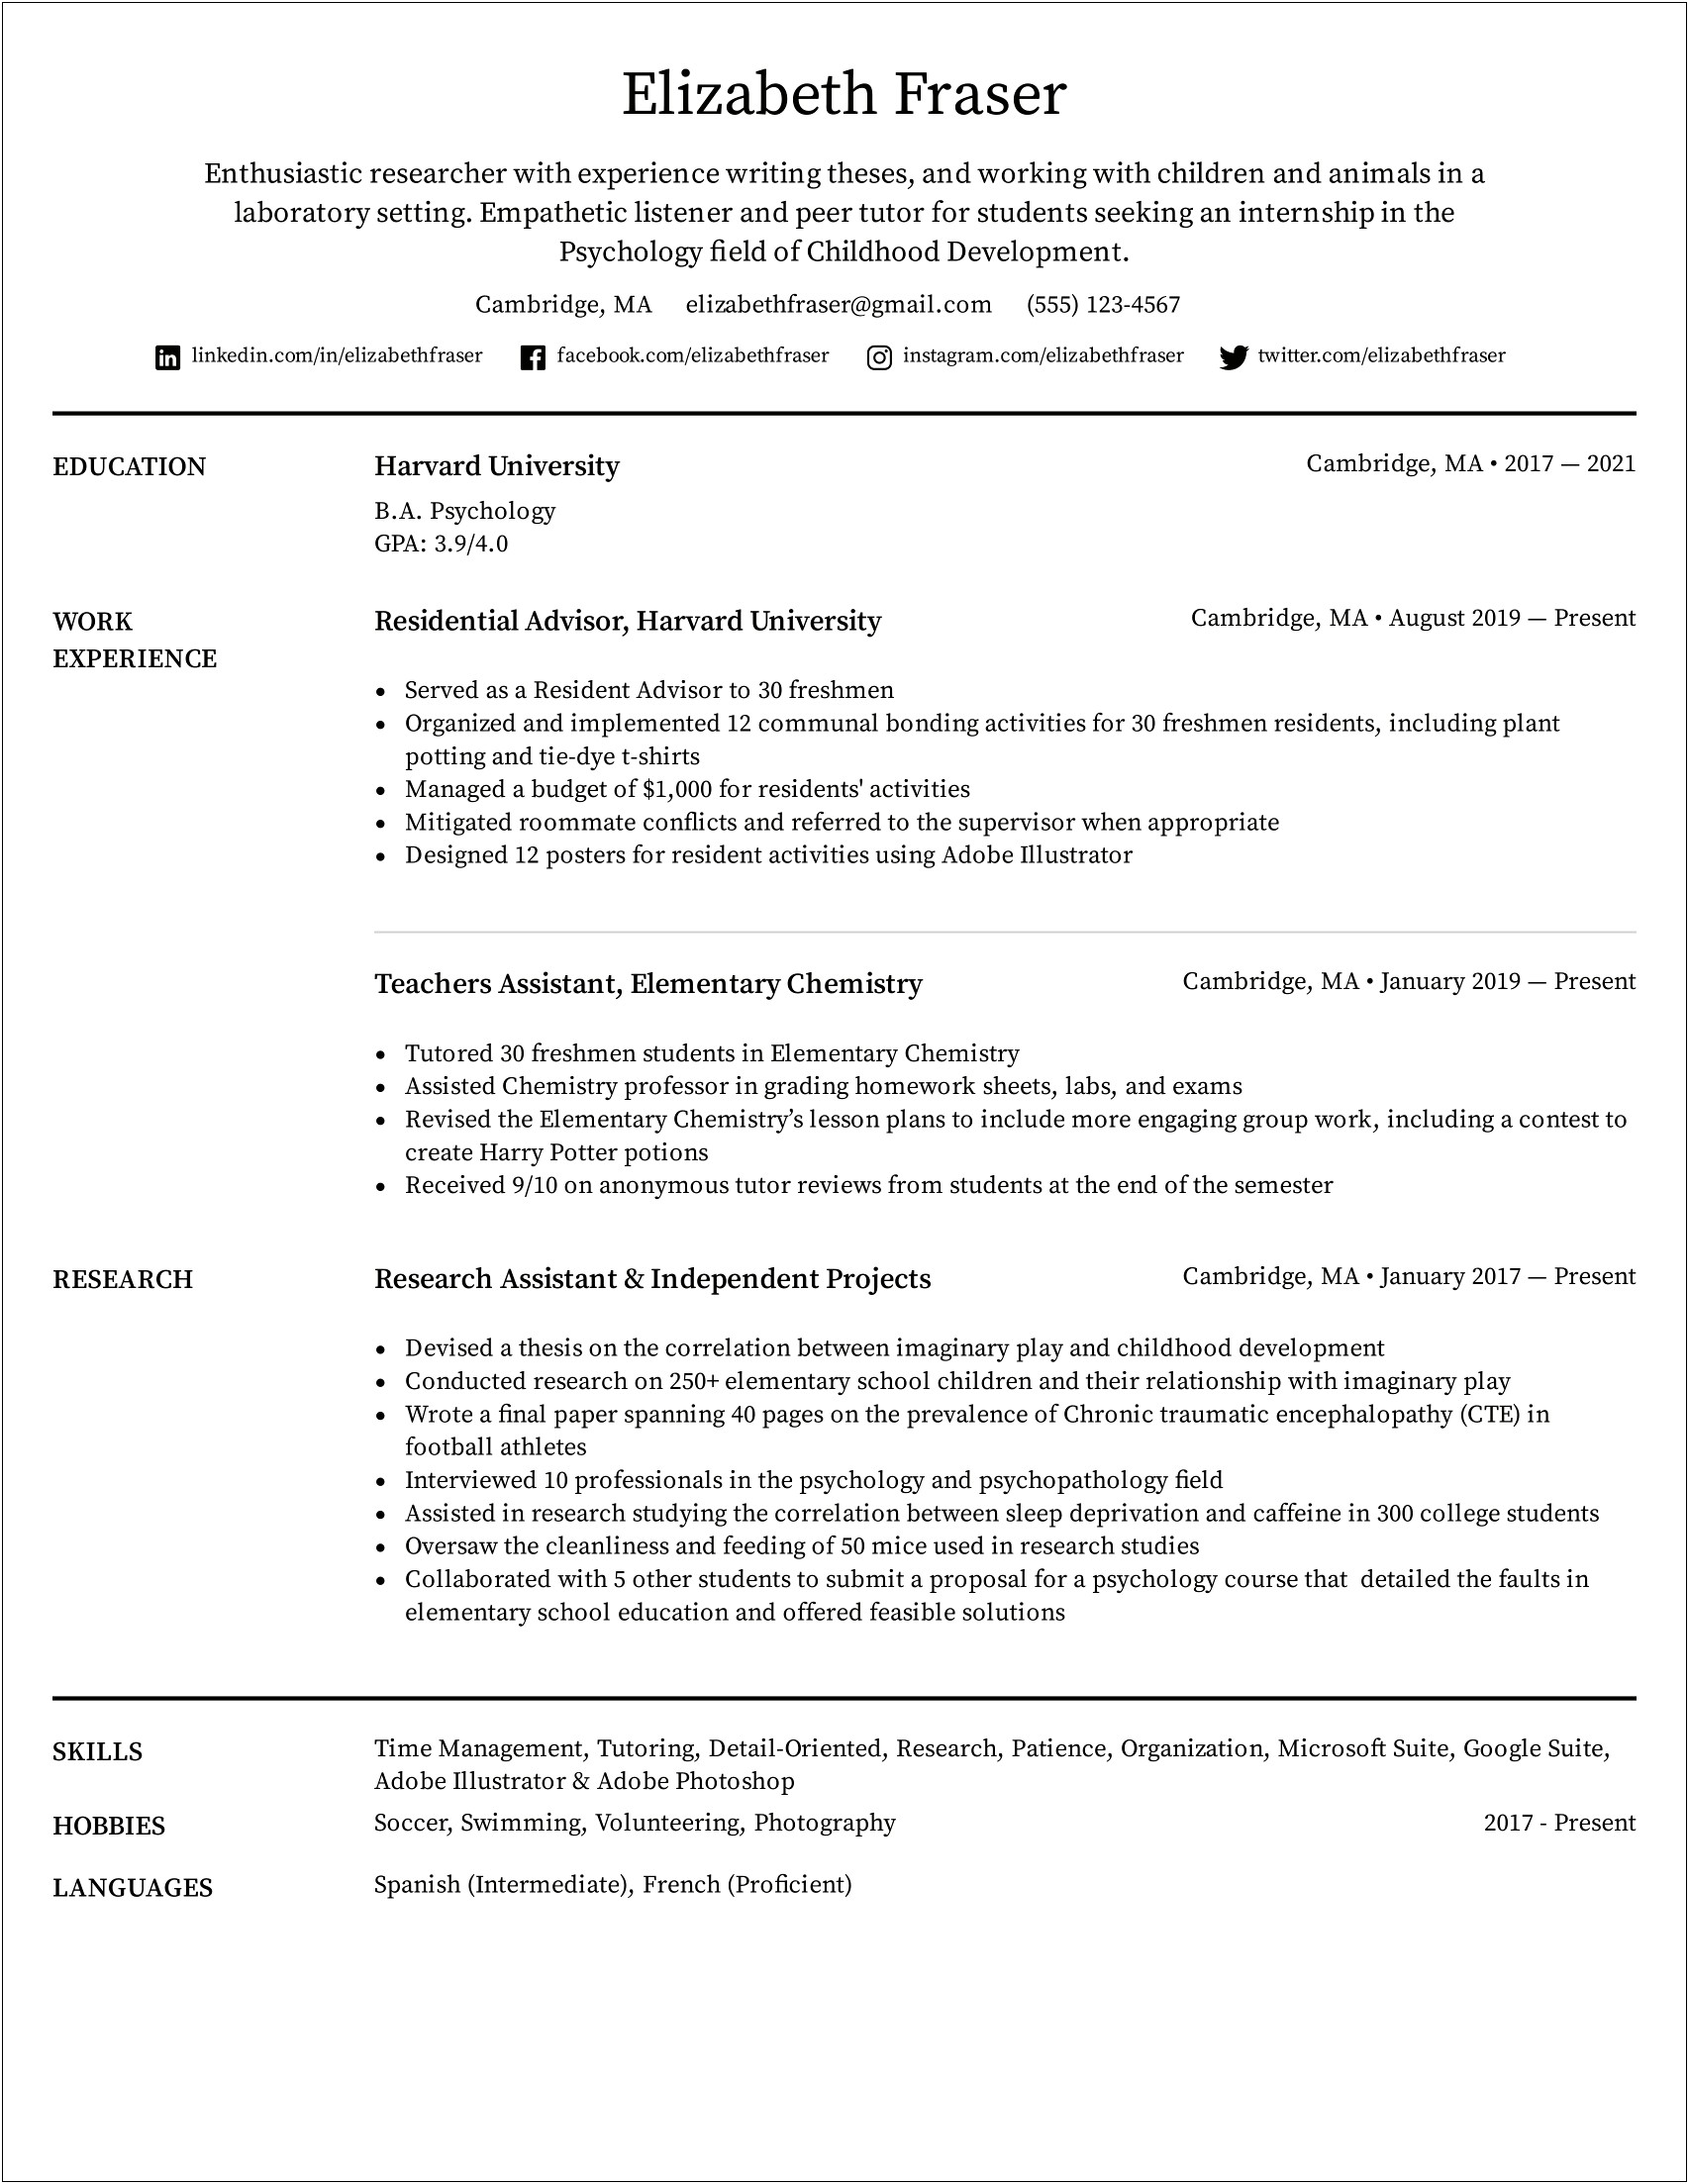 Reverse Chronological Resume Tamplate For Word